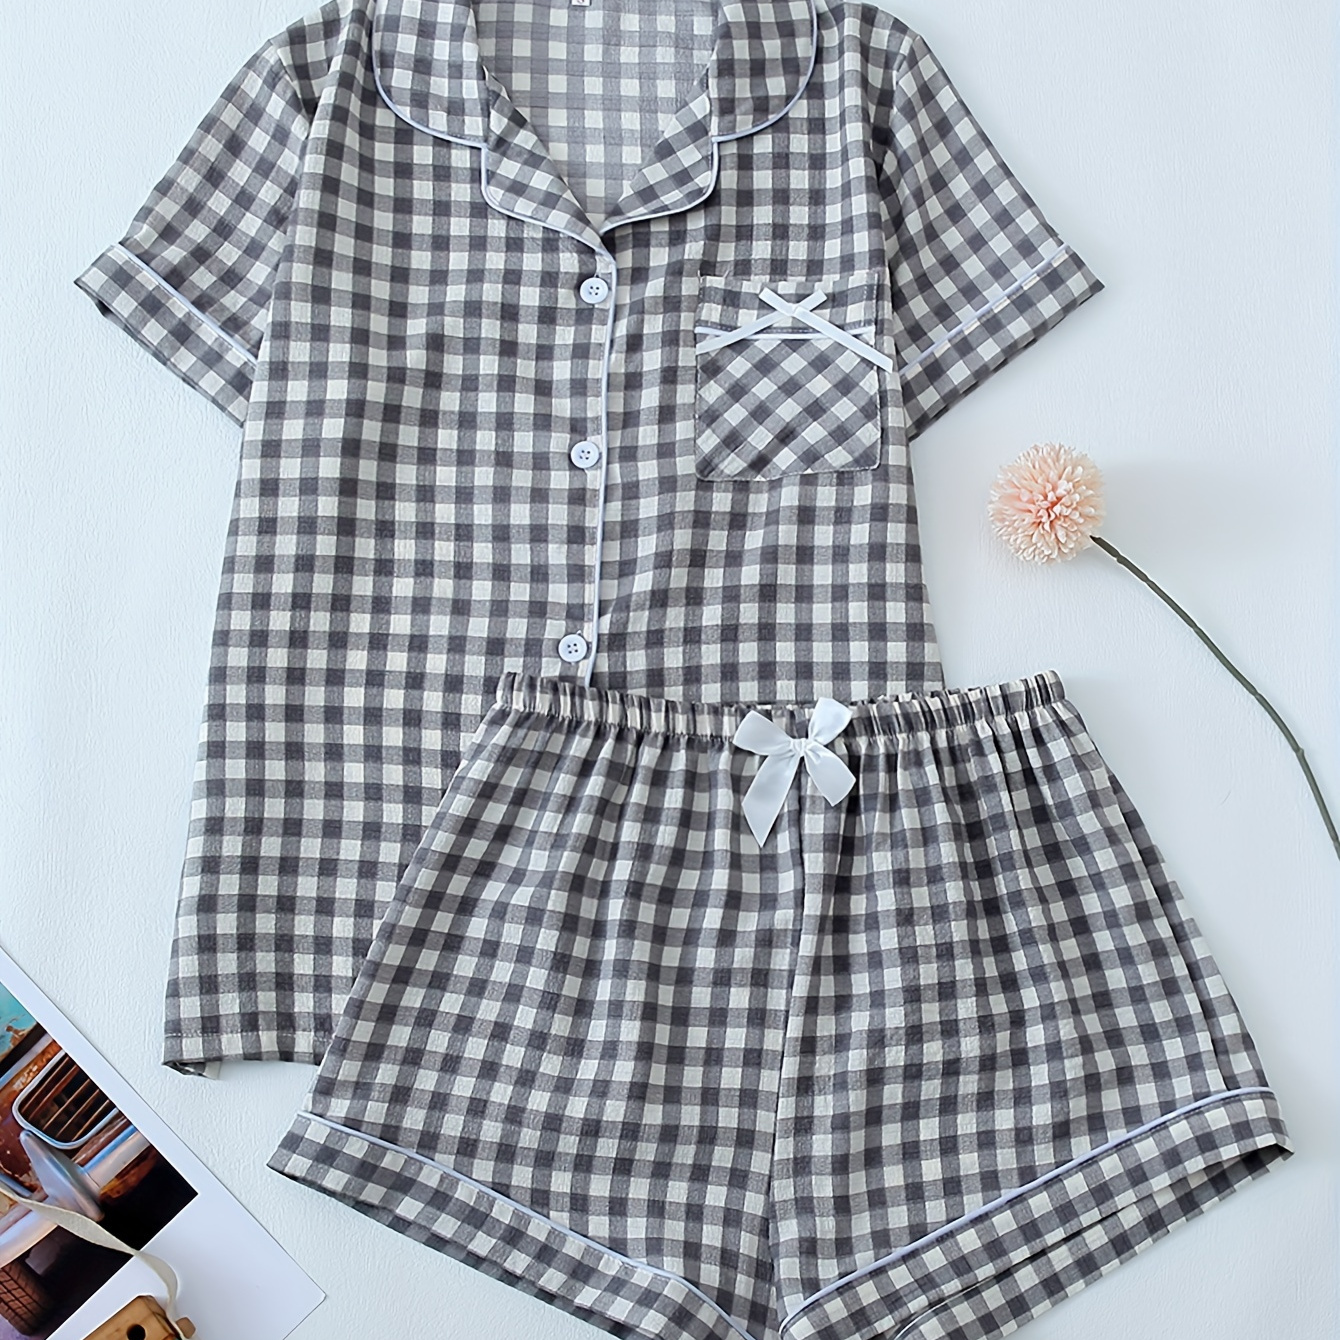 

Women's Plaid Print Casual Pajama Set, Short Sleeve Buttons Lapel Top & Shorts, Comfortable Relaxed Fit, Summer Nightwear